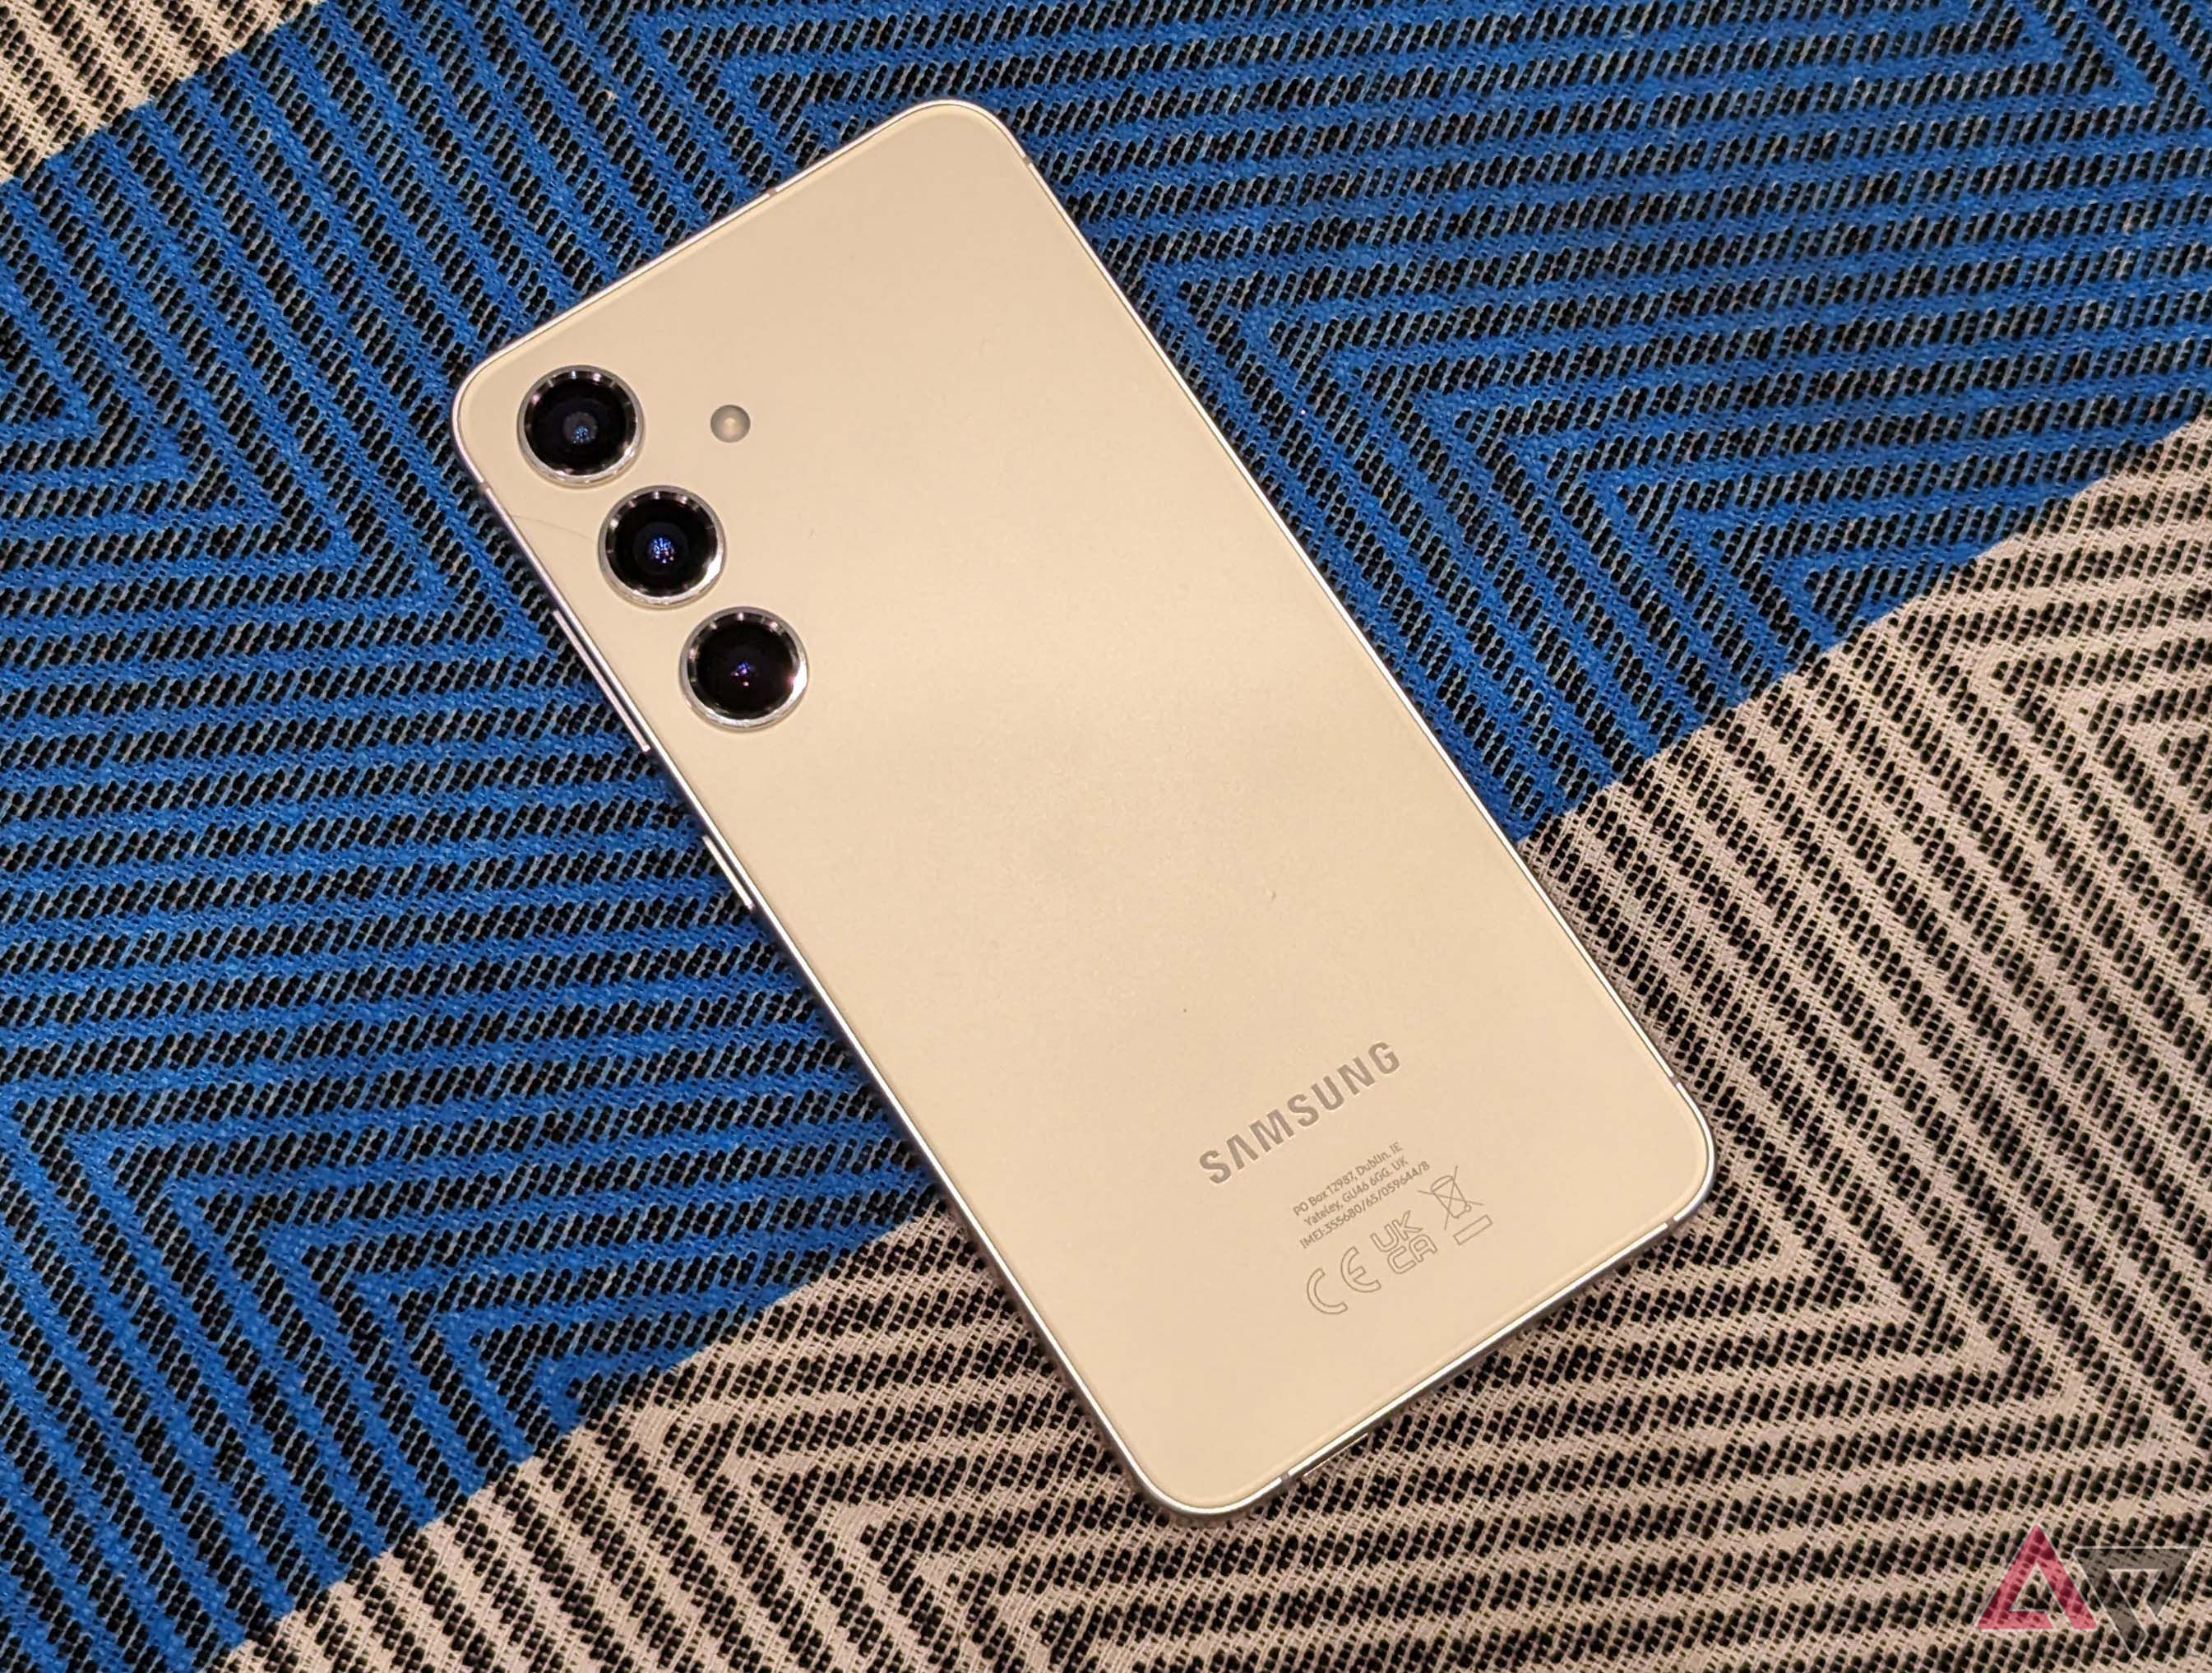 The rear of the Samsung Galaxy S24 on a patterned background